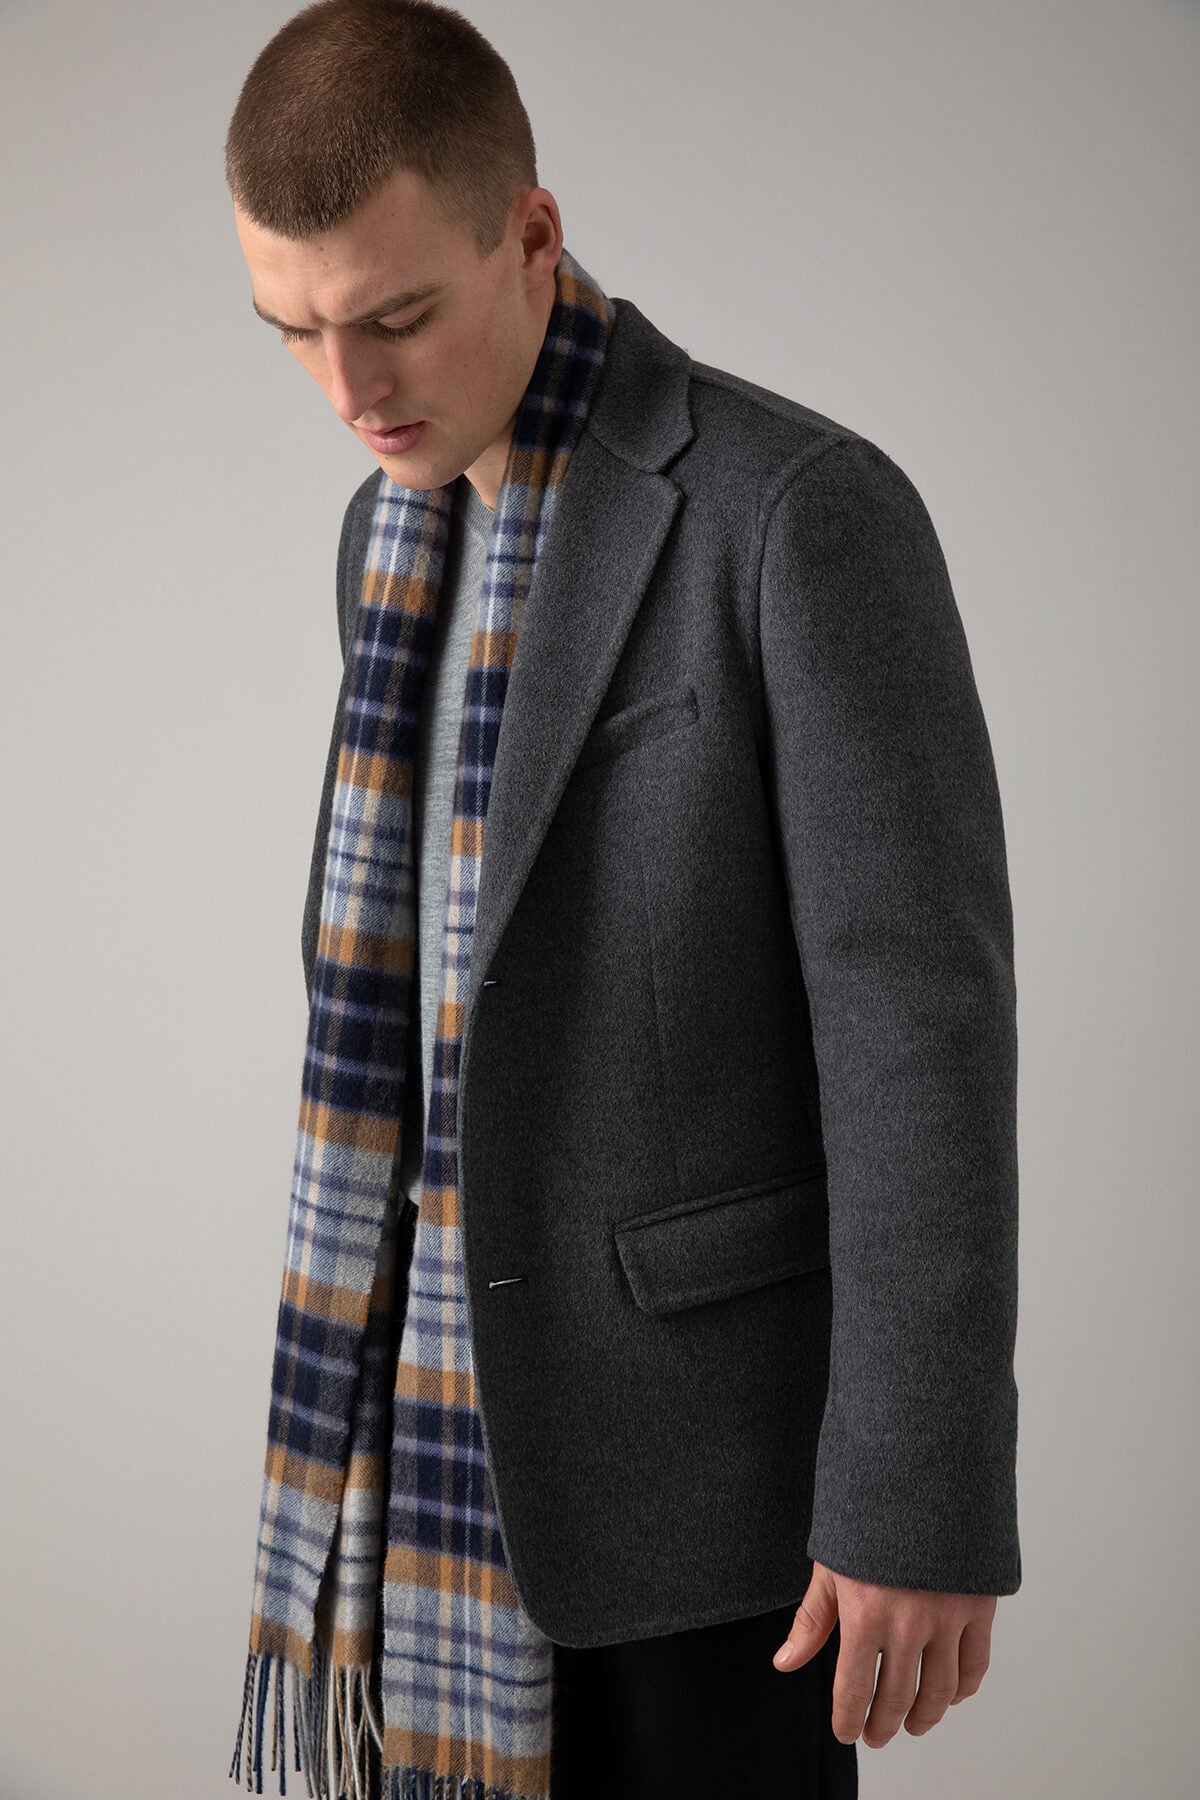 Model wearing Johnstons of Elgin House Check Oversized Tartan Cashmere Scarf on a grey background WA000057RU6933ONE